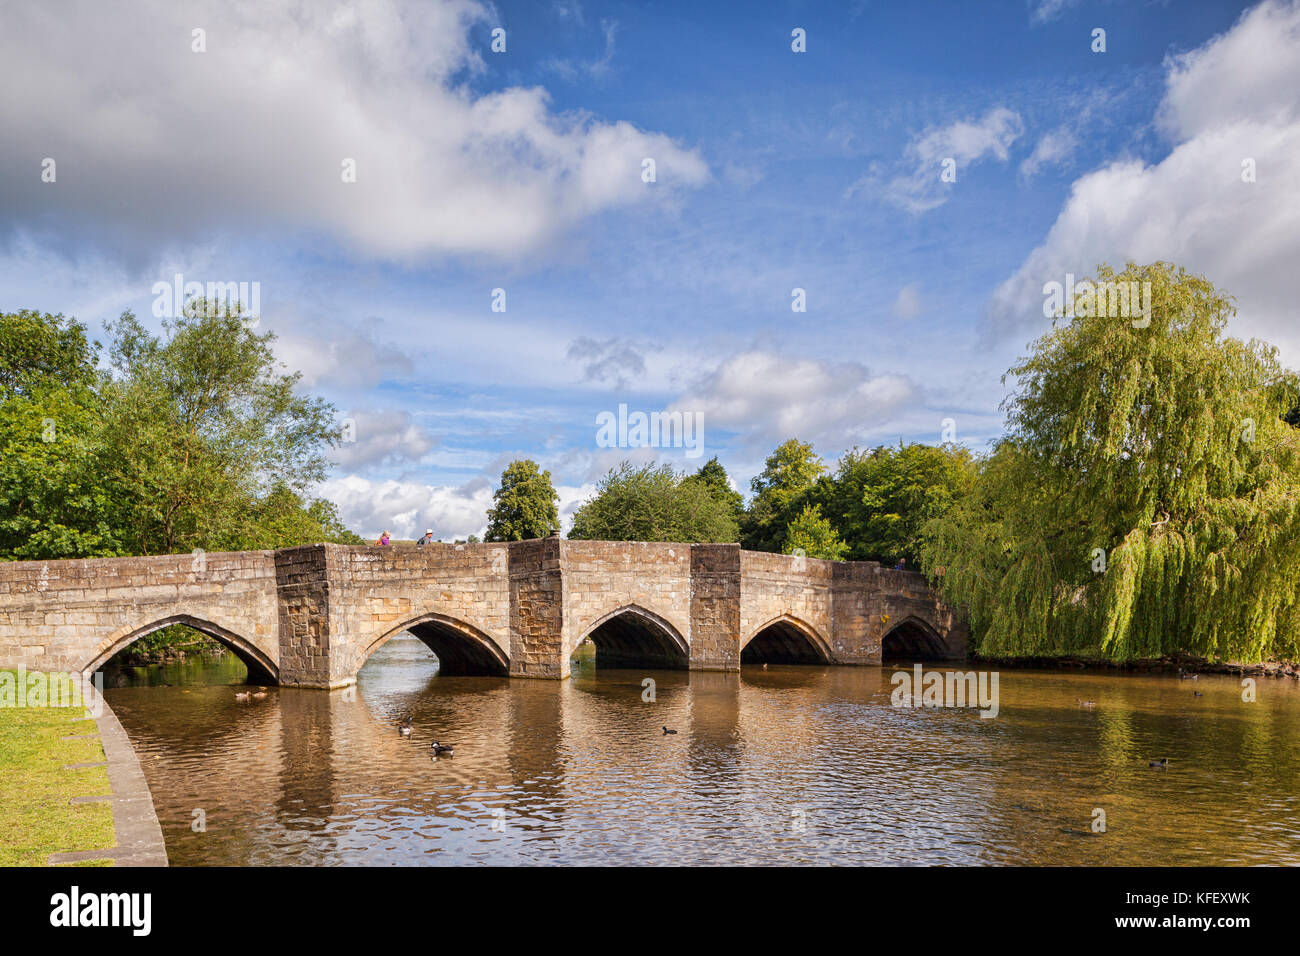 The 13th century, five arched bridge on the River Wye at Bakewell, Derbyshire, England Stock Photo